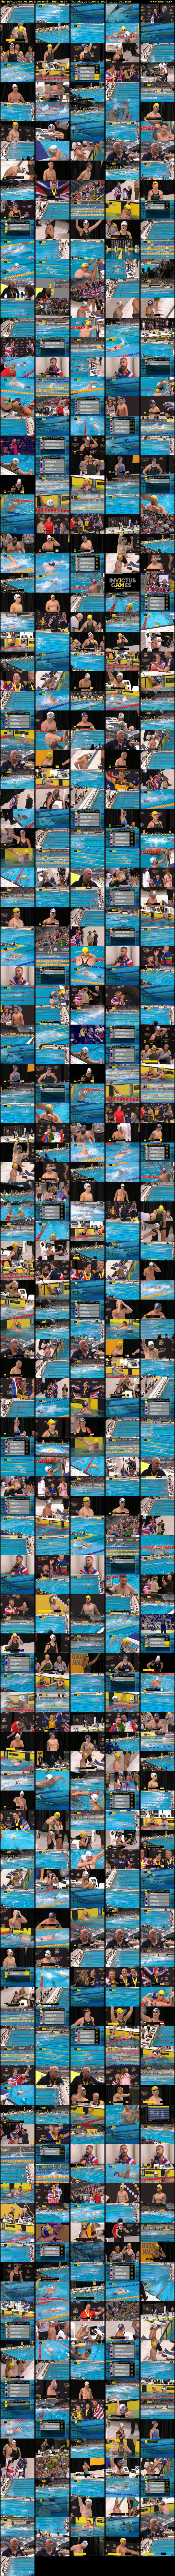 The Invictus Games 2018: Swimming (BBC RB 1) Thursday 25 October 2018 12:00 - 18:00